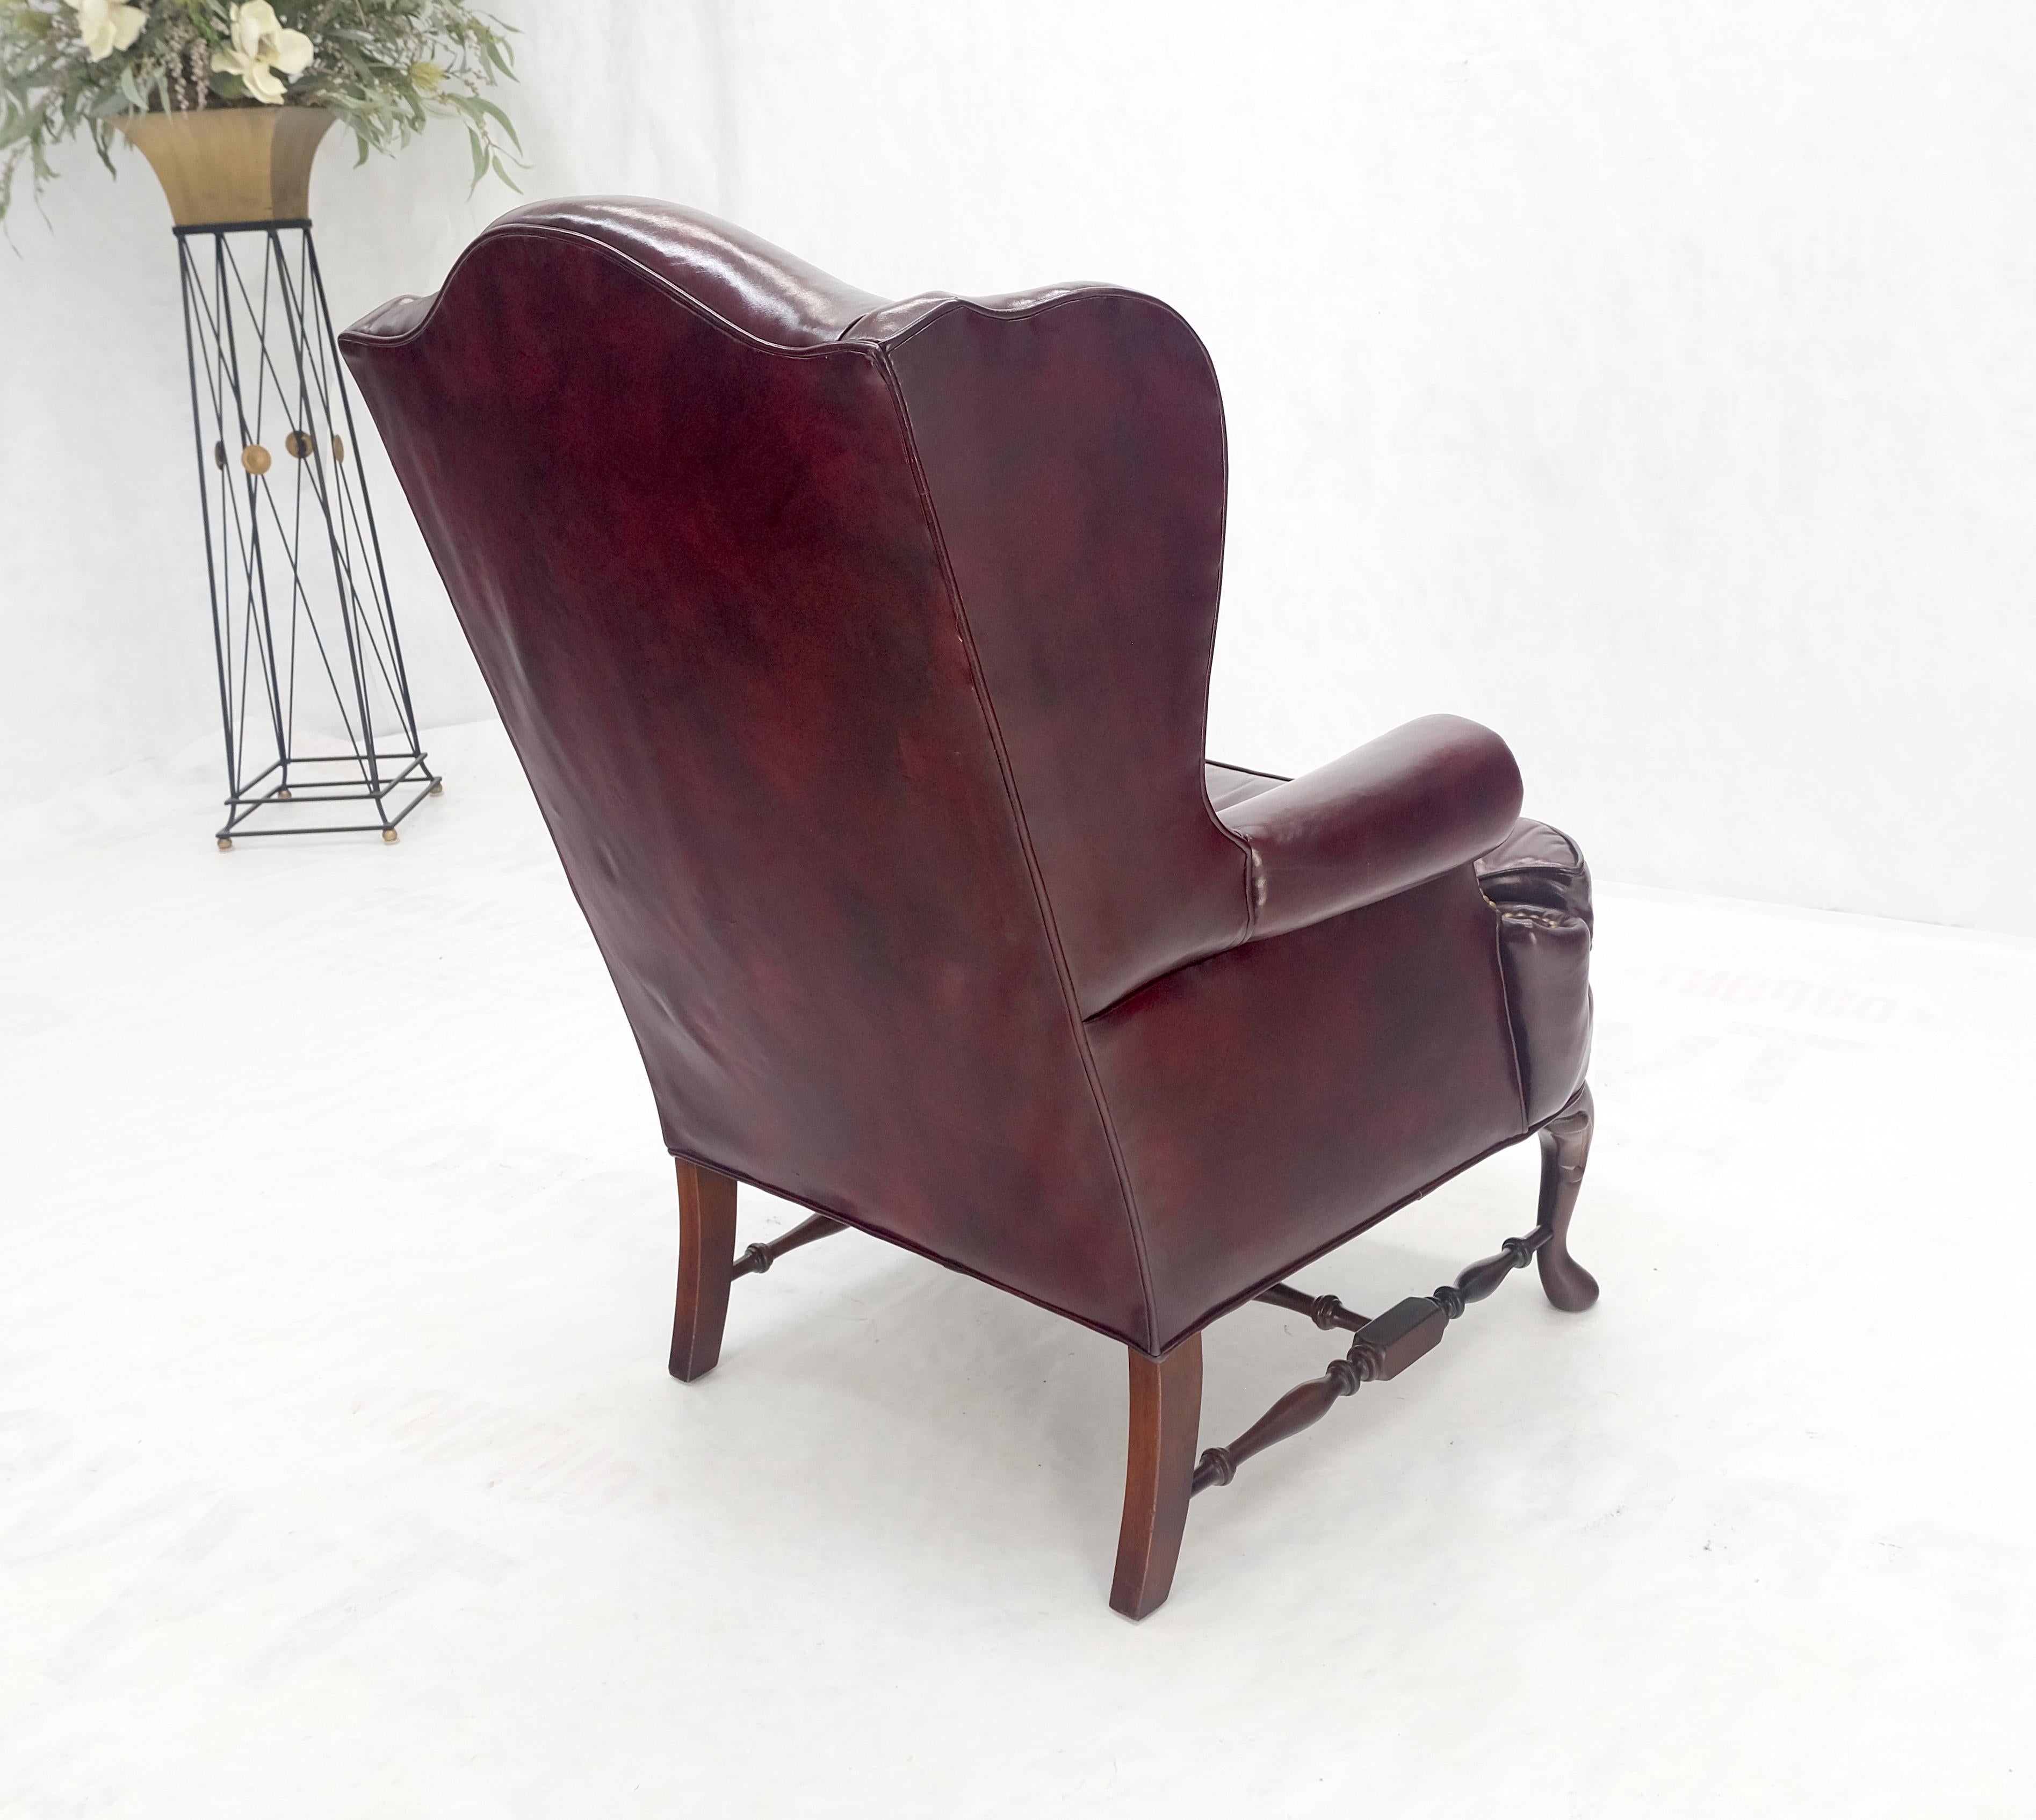 Kindel Burgundy Leather Upholstery Carved Mahogany Legs Wingback Chair & Ottoman For Sale 9